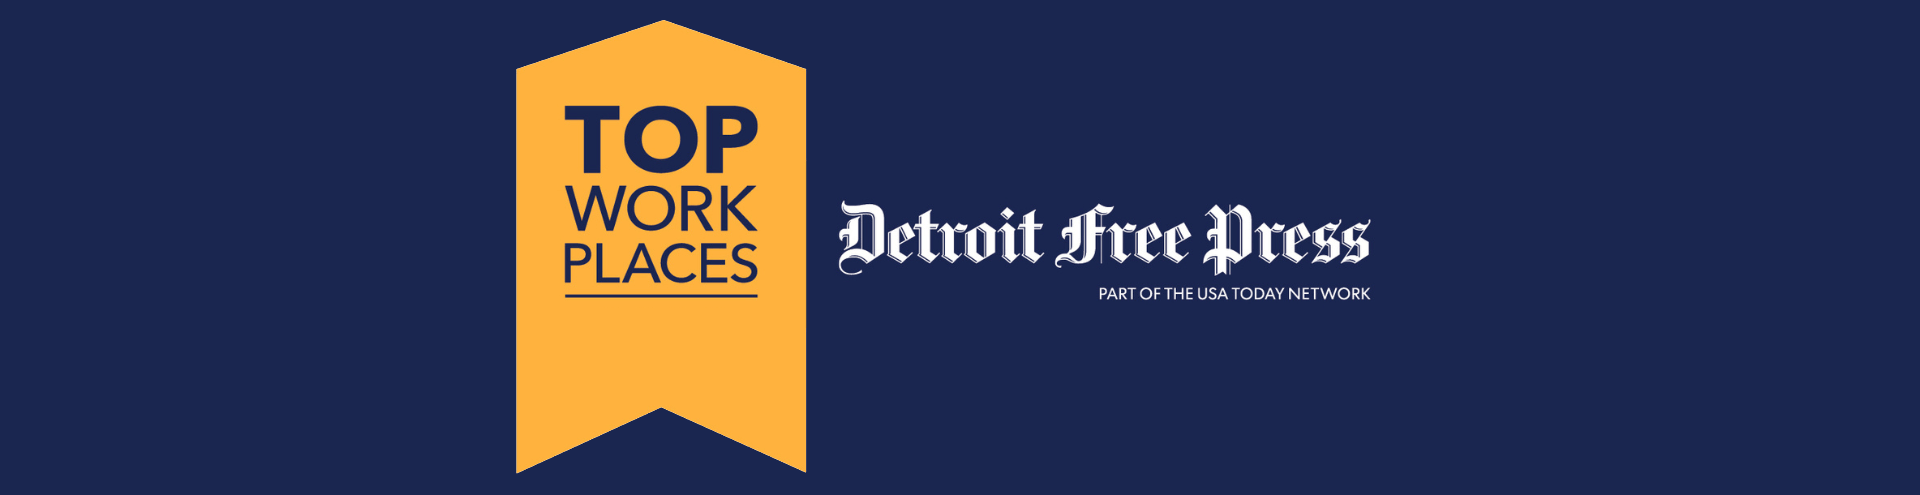 Homestead Healthcare Voted Top Work Places in Michigan by Detroit Free Press - hero